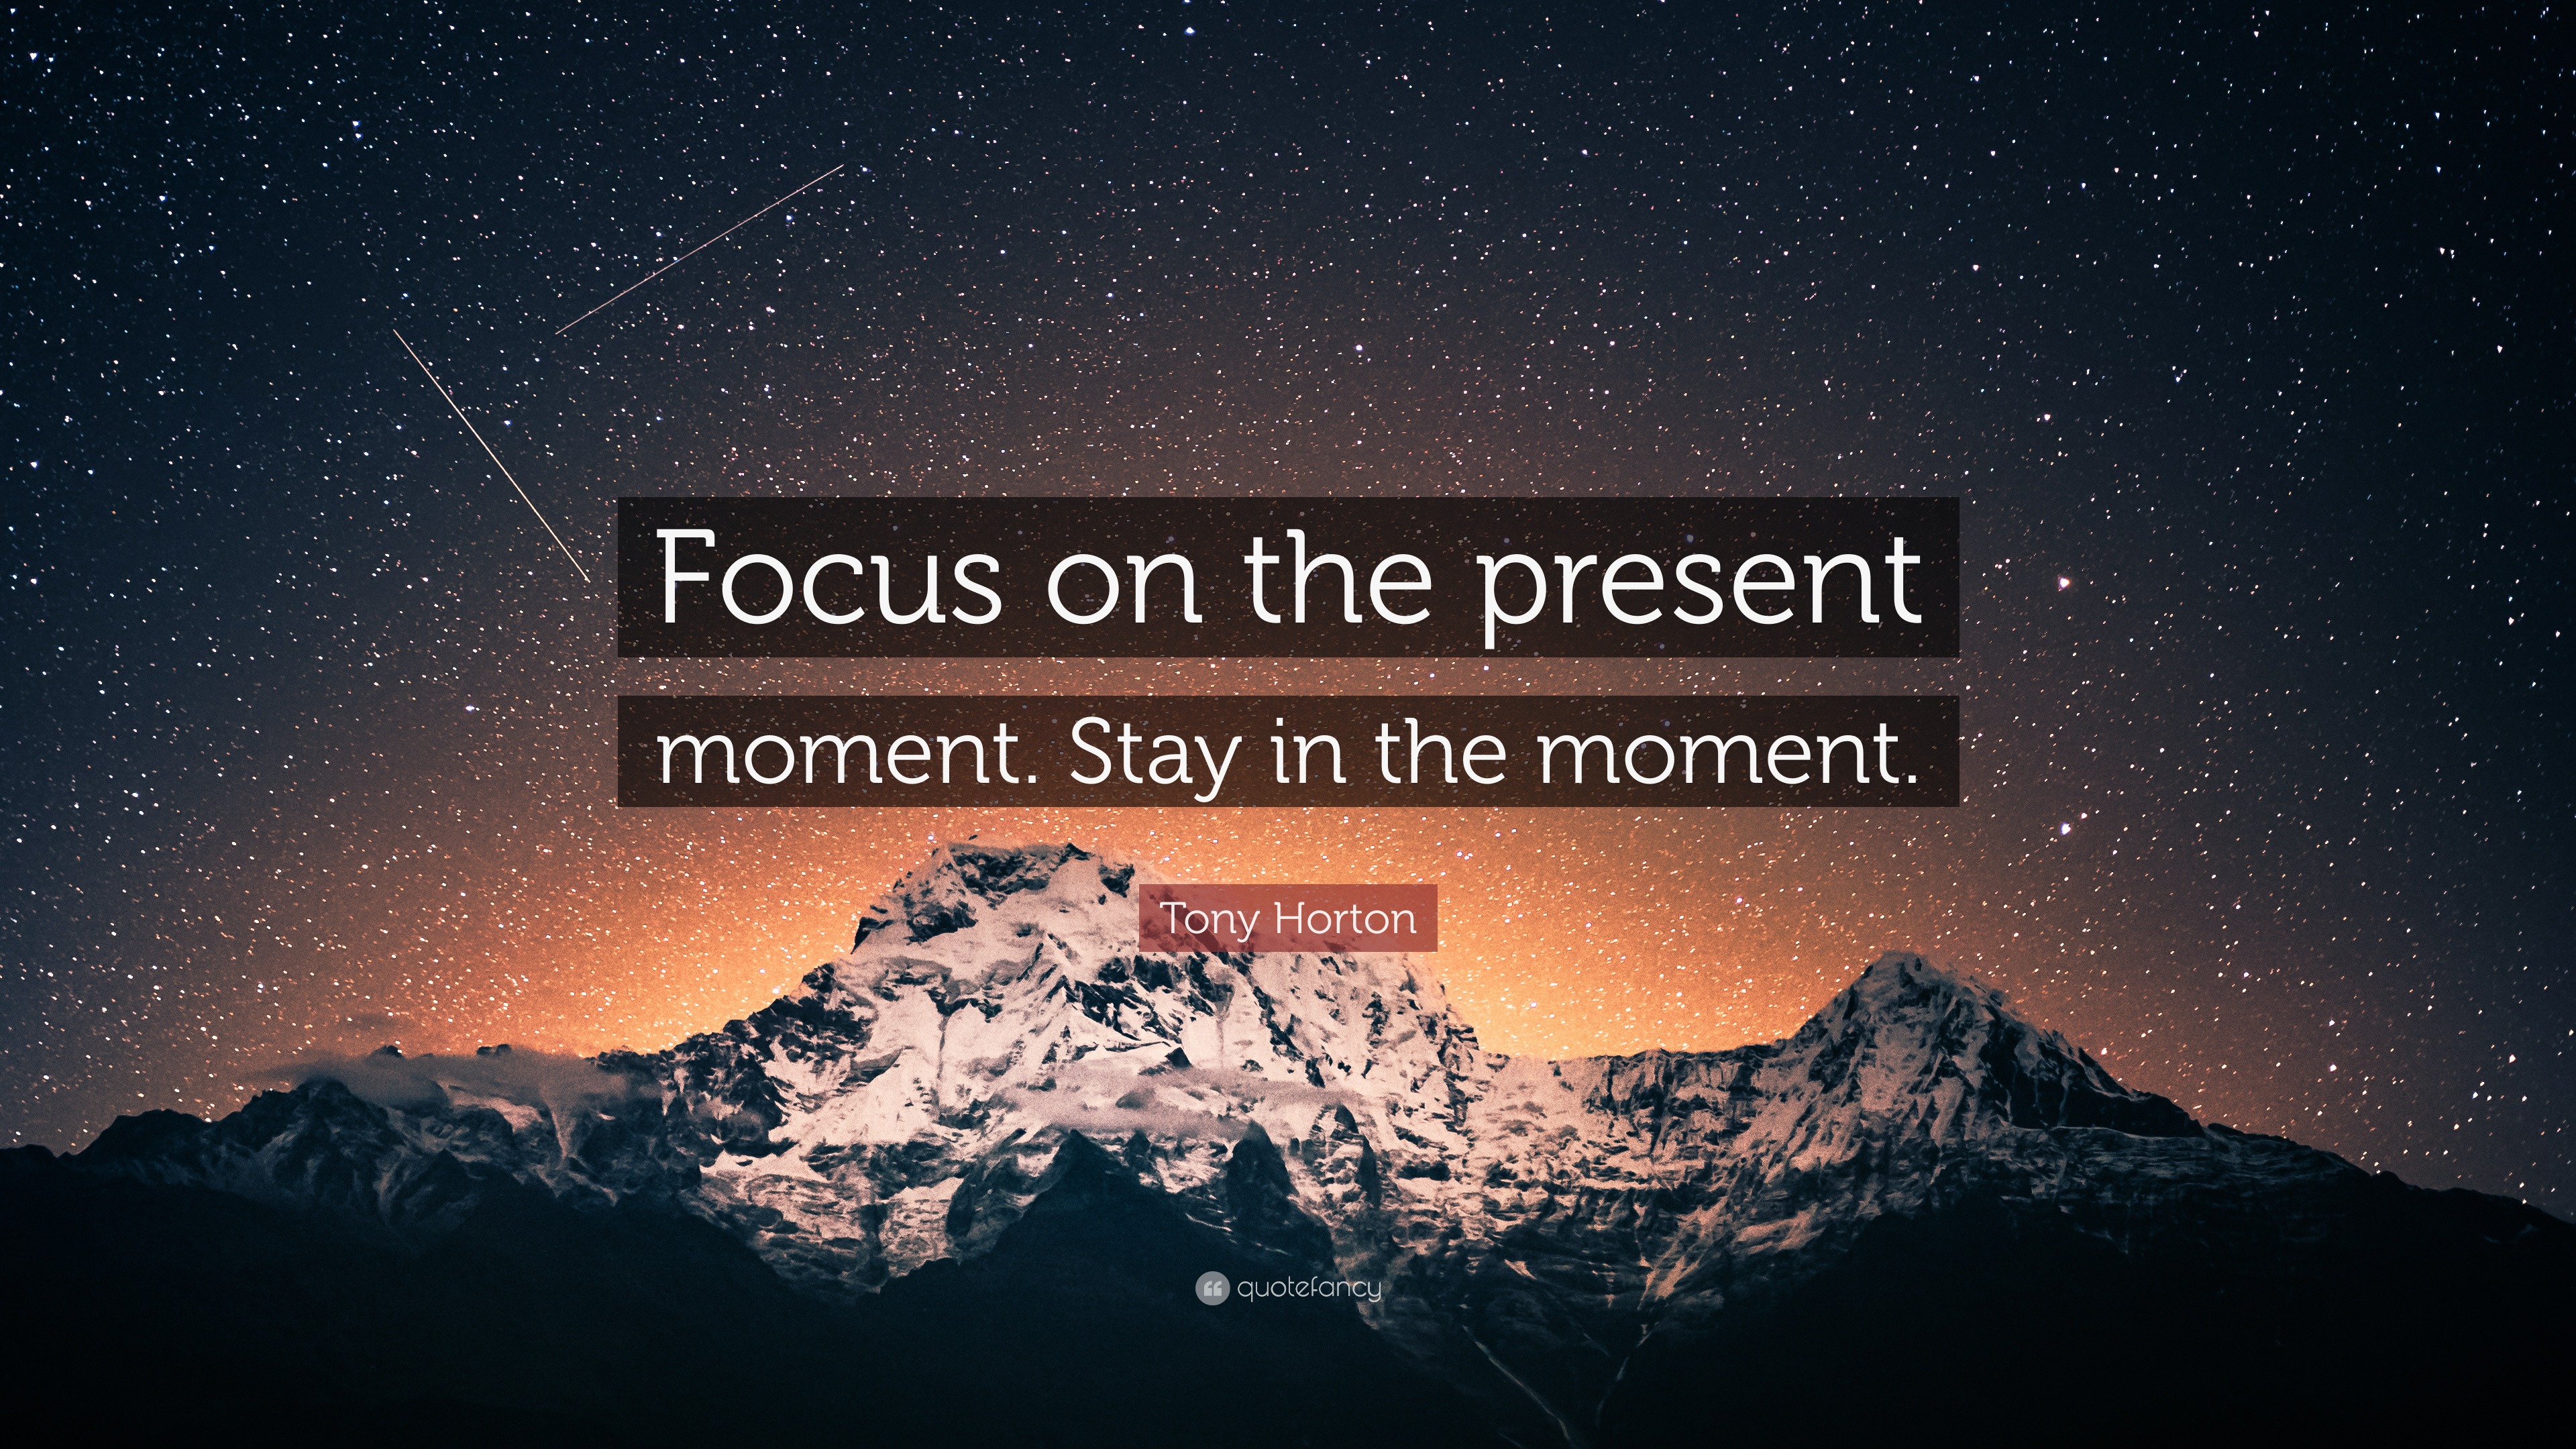 Tony Horton Quote: “Focus on the present moment. Stay in the moment.”